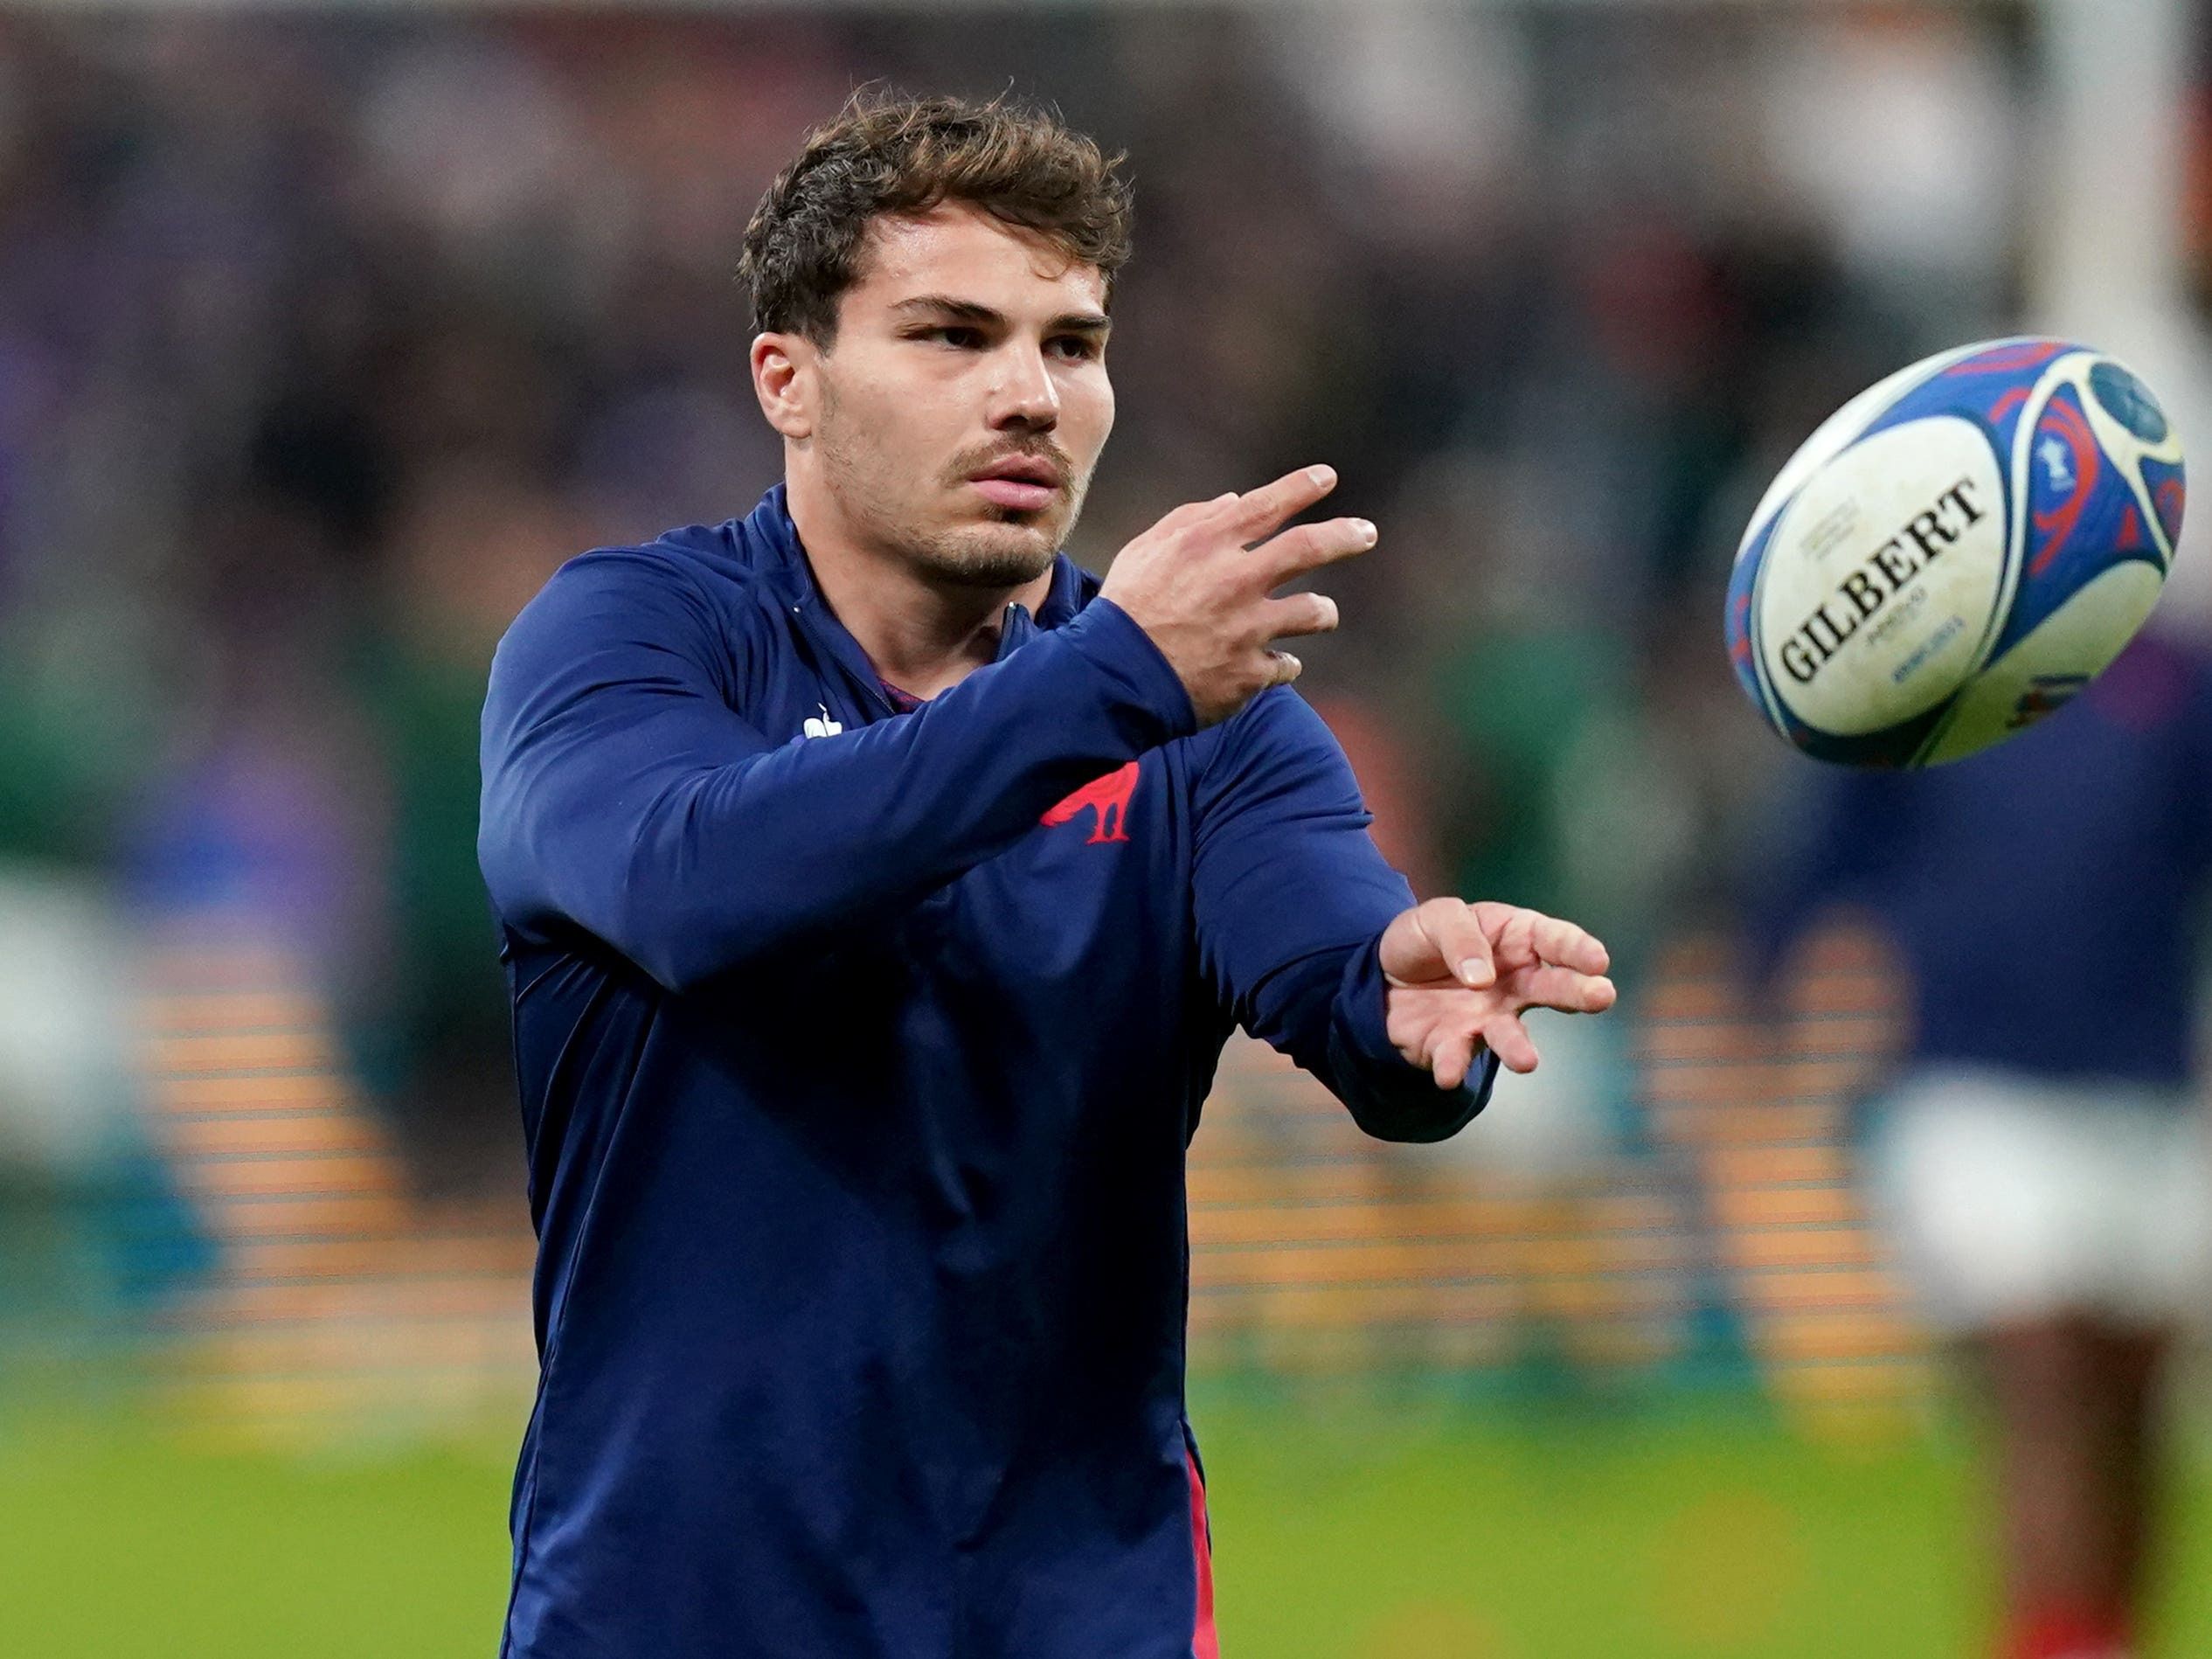 Bryan Habana expects ‘box office’ Antoine Dupont to light up sevens at Olympics